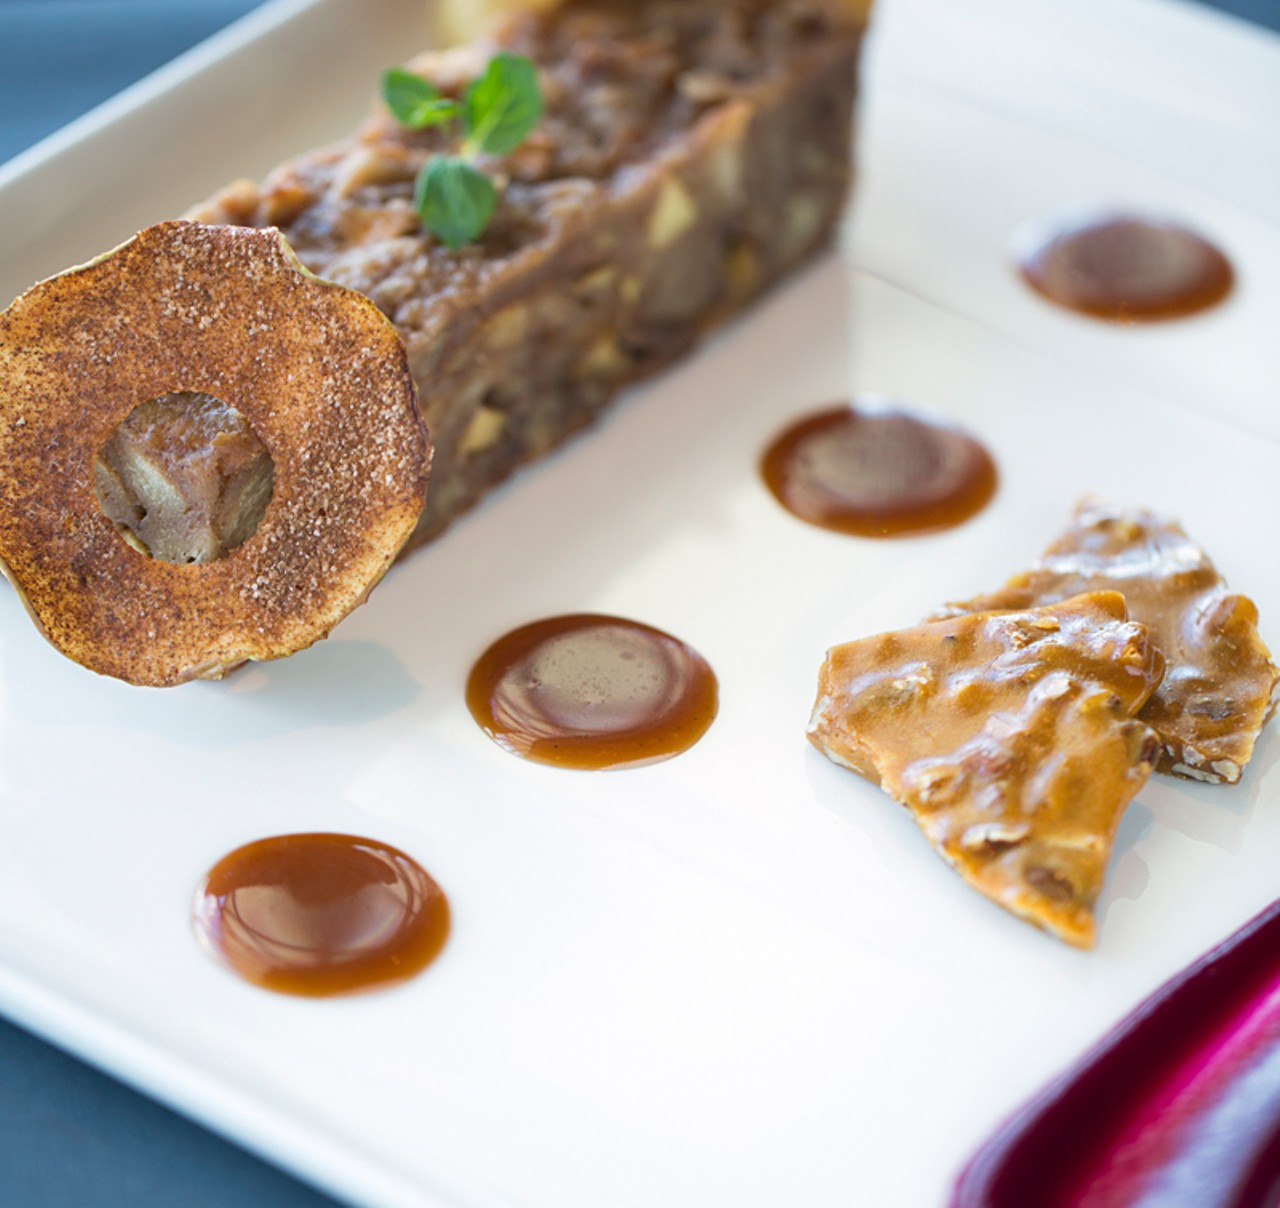 "Warm Missouri Apple & Pecan Bread Pudding," with pecan brittle, roasted beet-agave sauce and caramel.